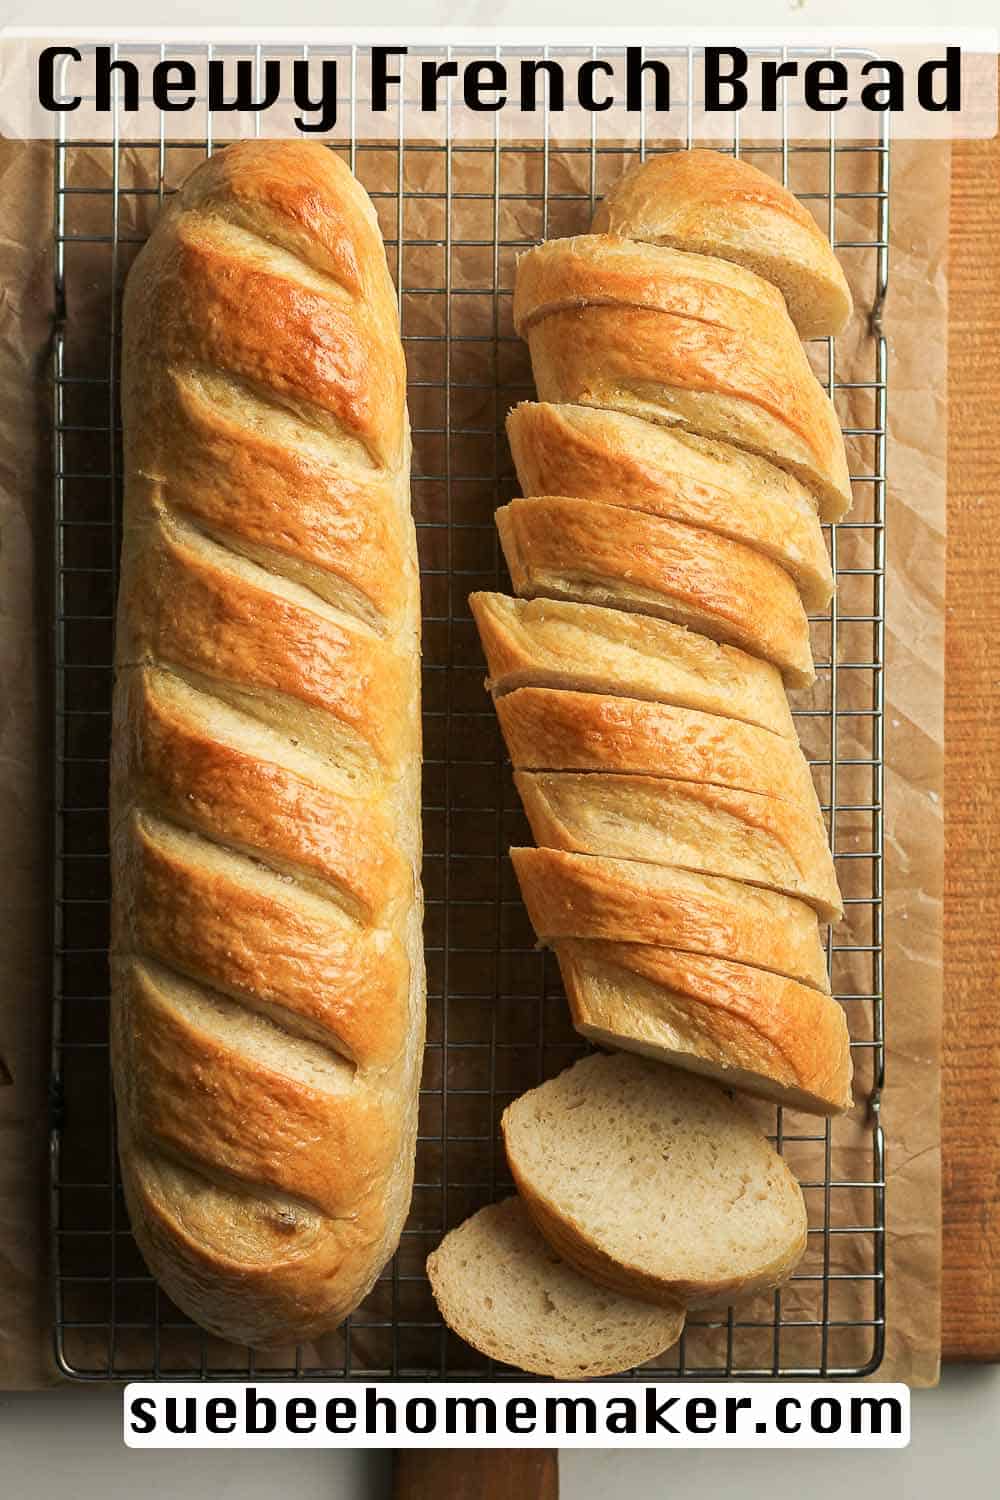 A large loaf of French bread and another one sliced.